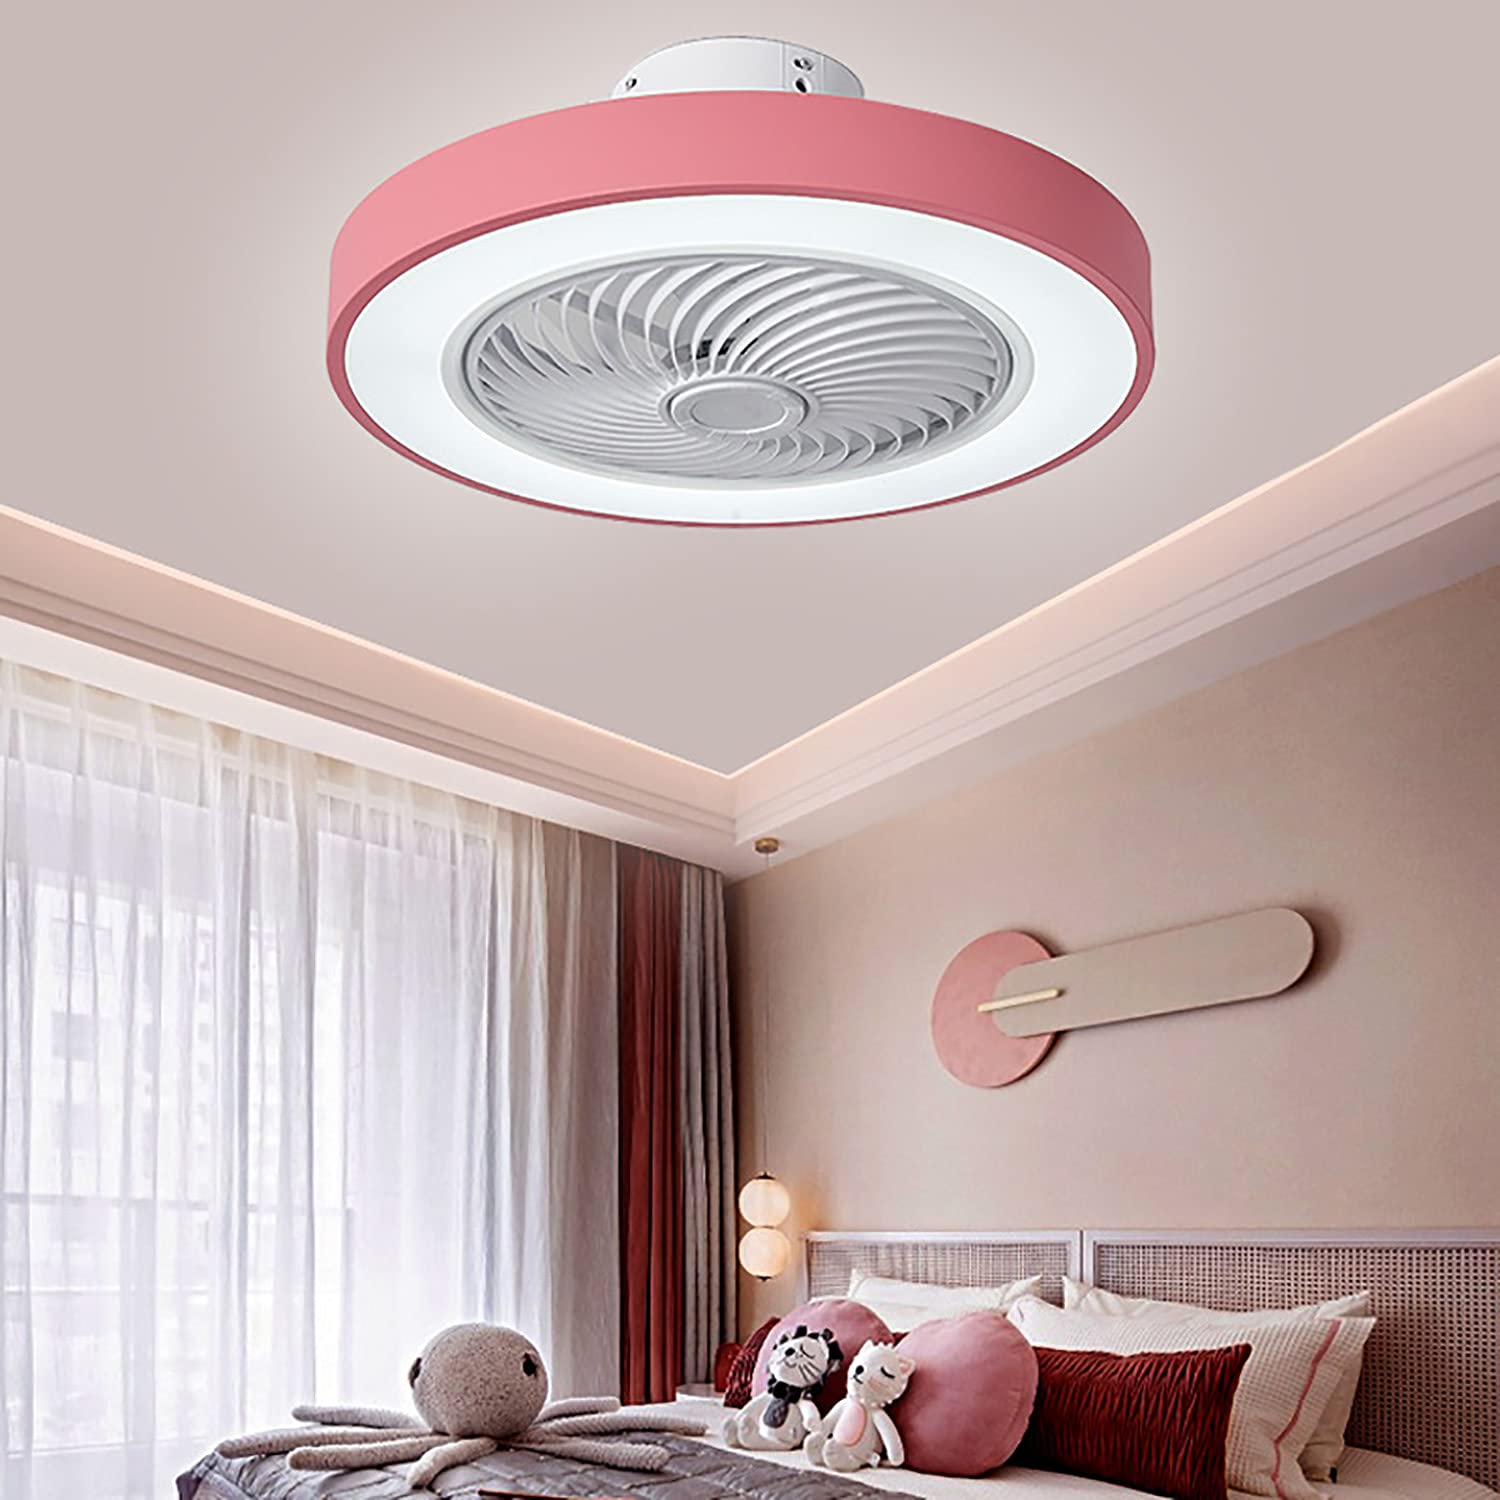 SEYFI Ceiling Fan Lights with Remote Control Fan Light Dimmable Ceiling Fans with Lights and Remote for Bedrooms Ceiling Fans Withps Silent in Lighting 3 Speeds Timer/Pink